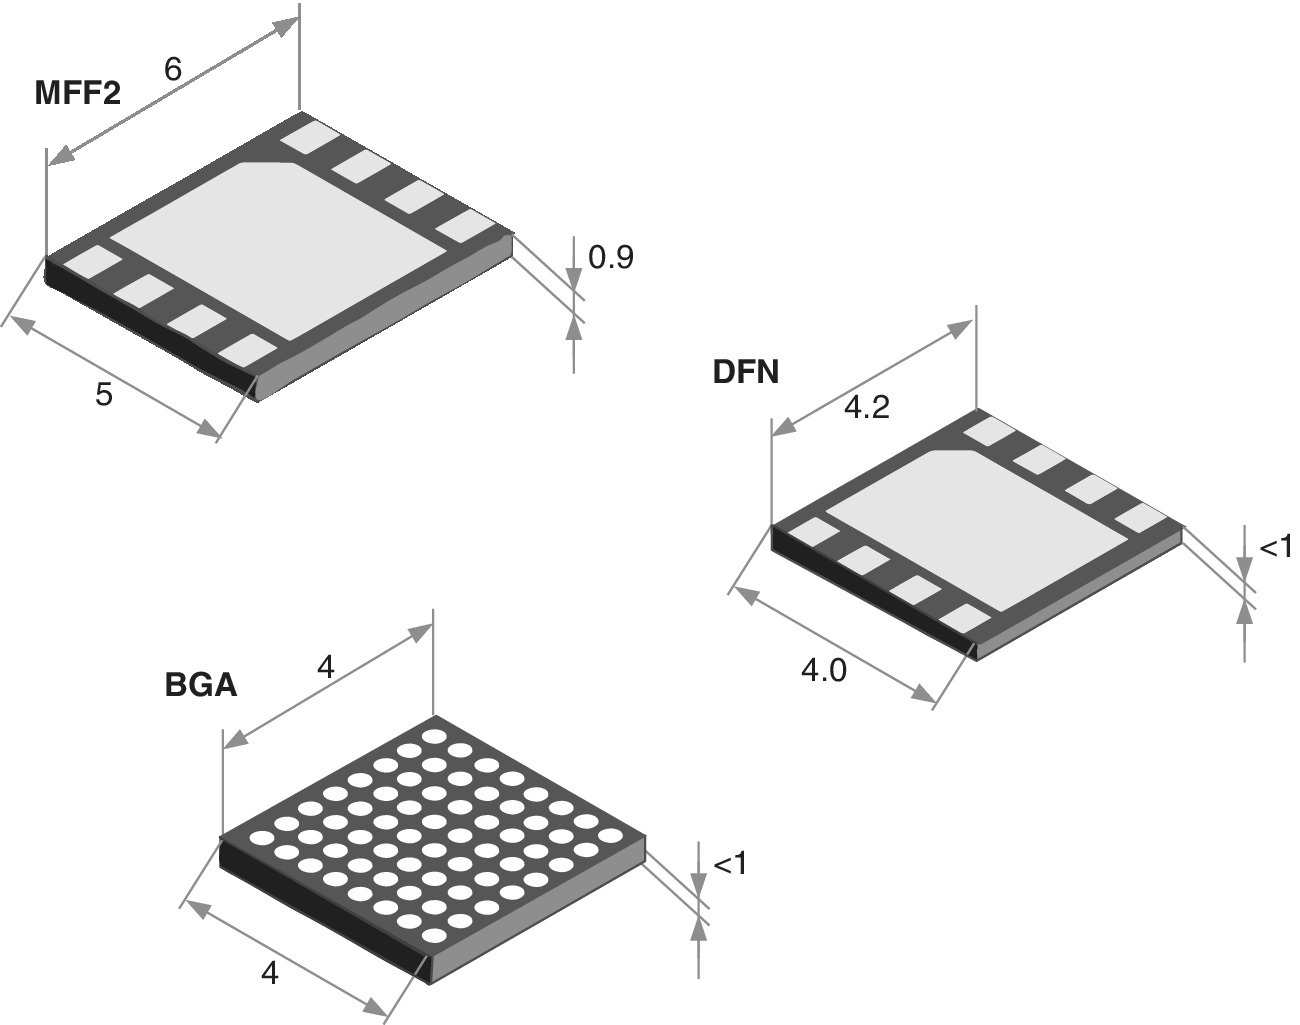 Three schematics illustrating examples of the physically embedded SEs with labels MFF2, BGA, and DFN.